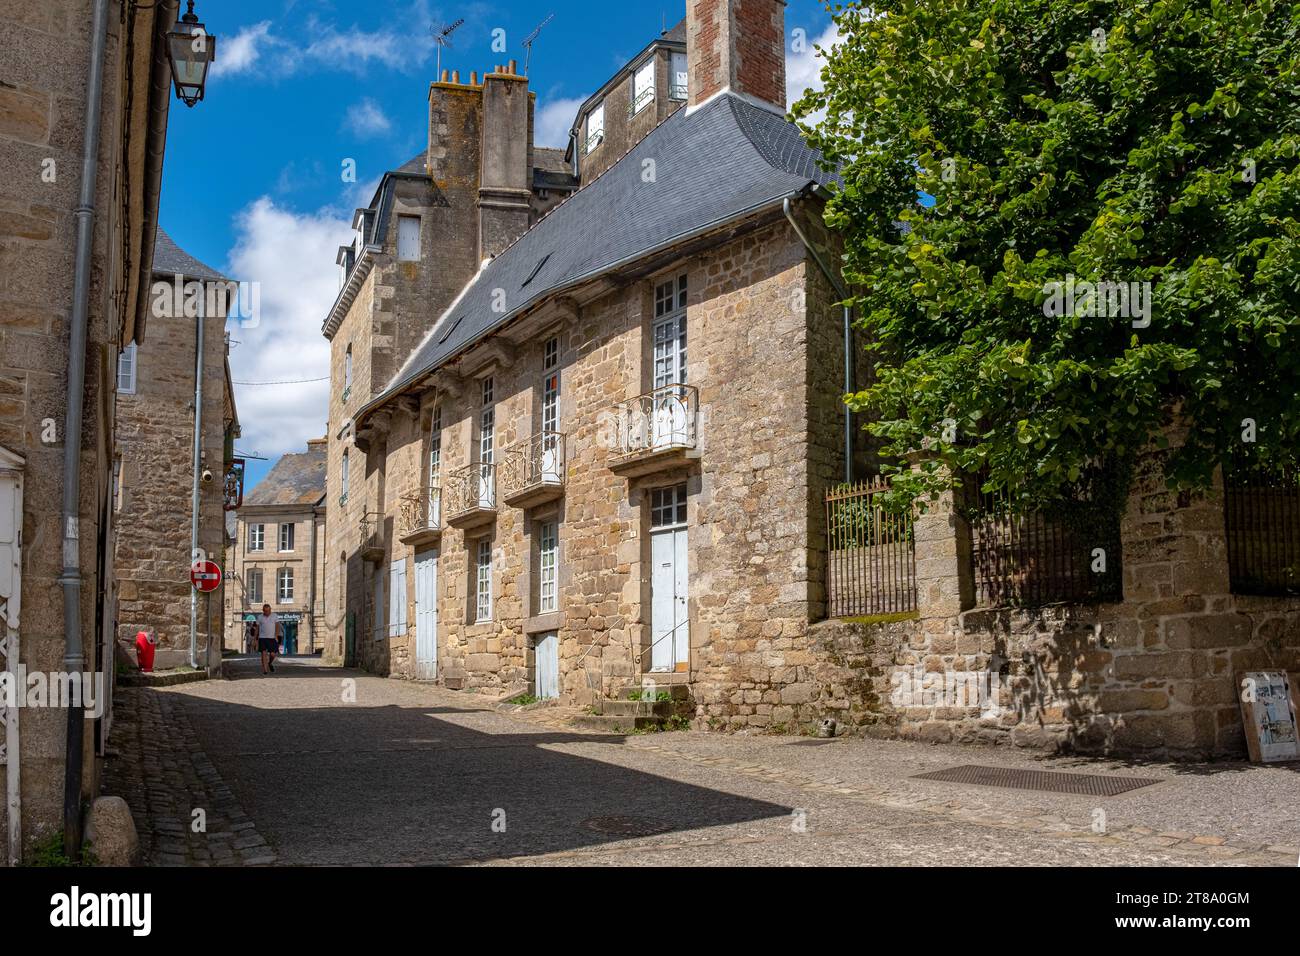 A classical architecture house  in Moncontour, Brittany, France, taken on a sunny summer day with no people Stock Photo